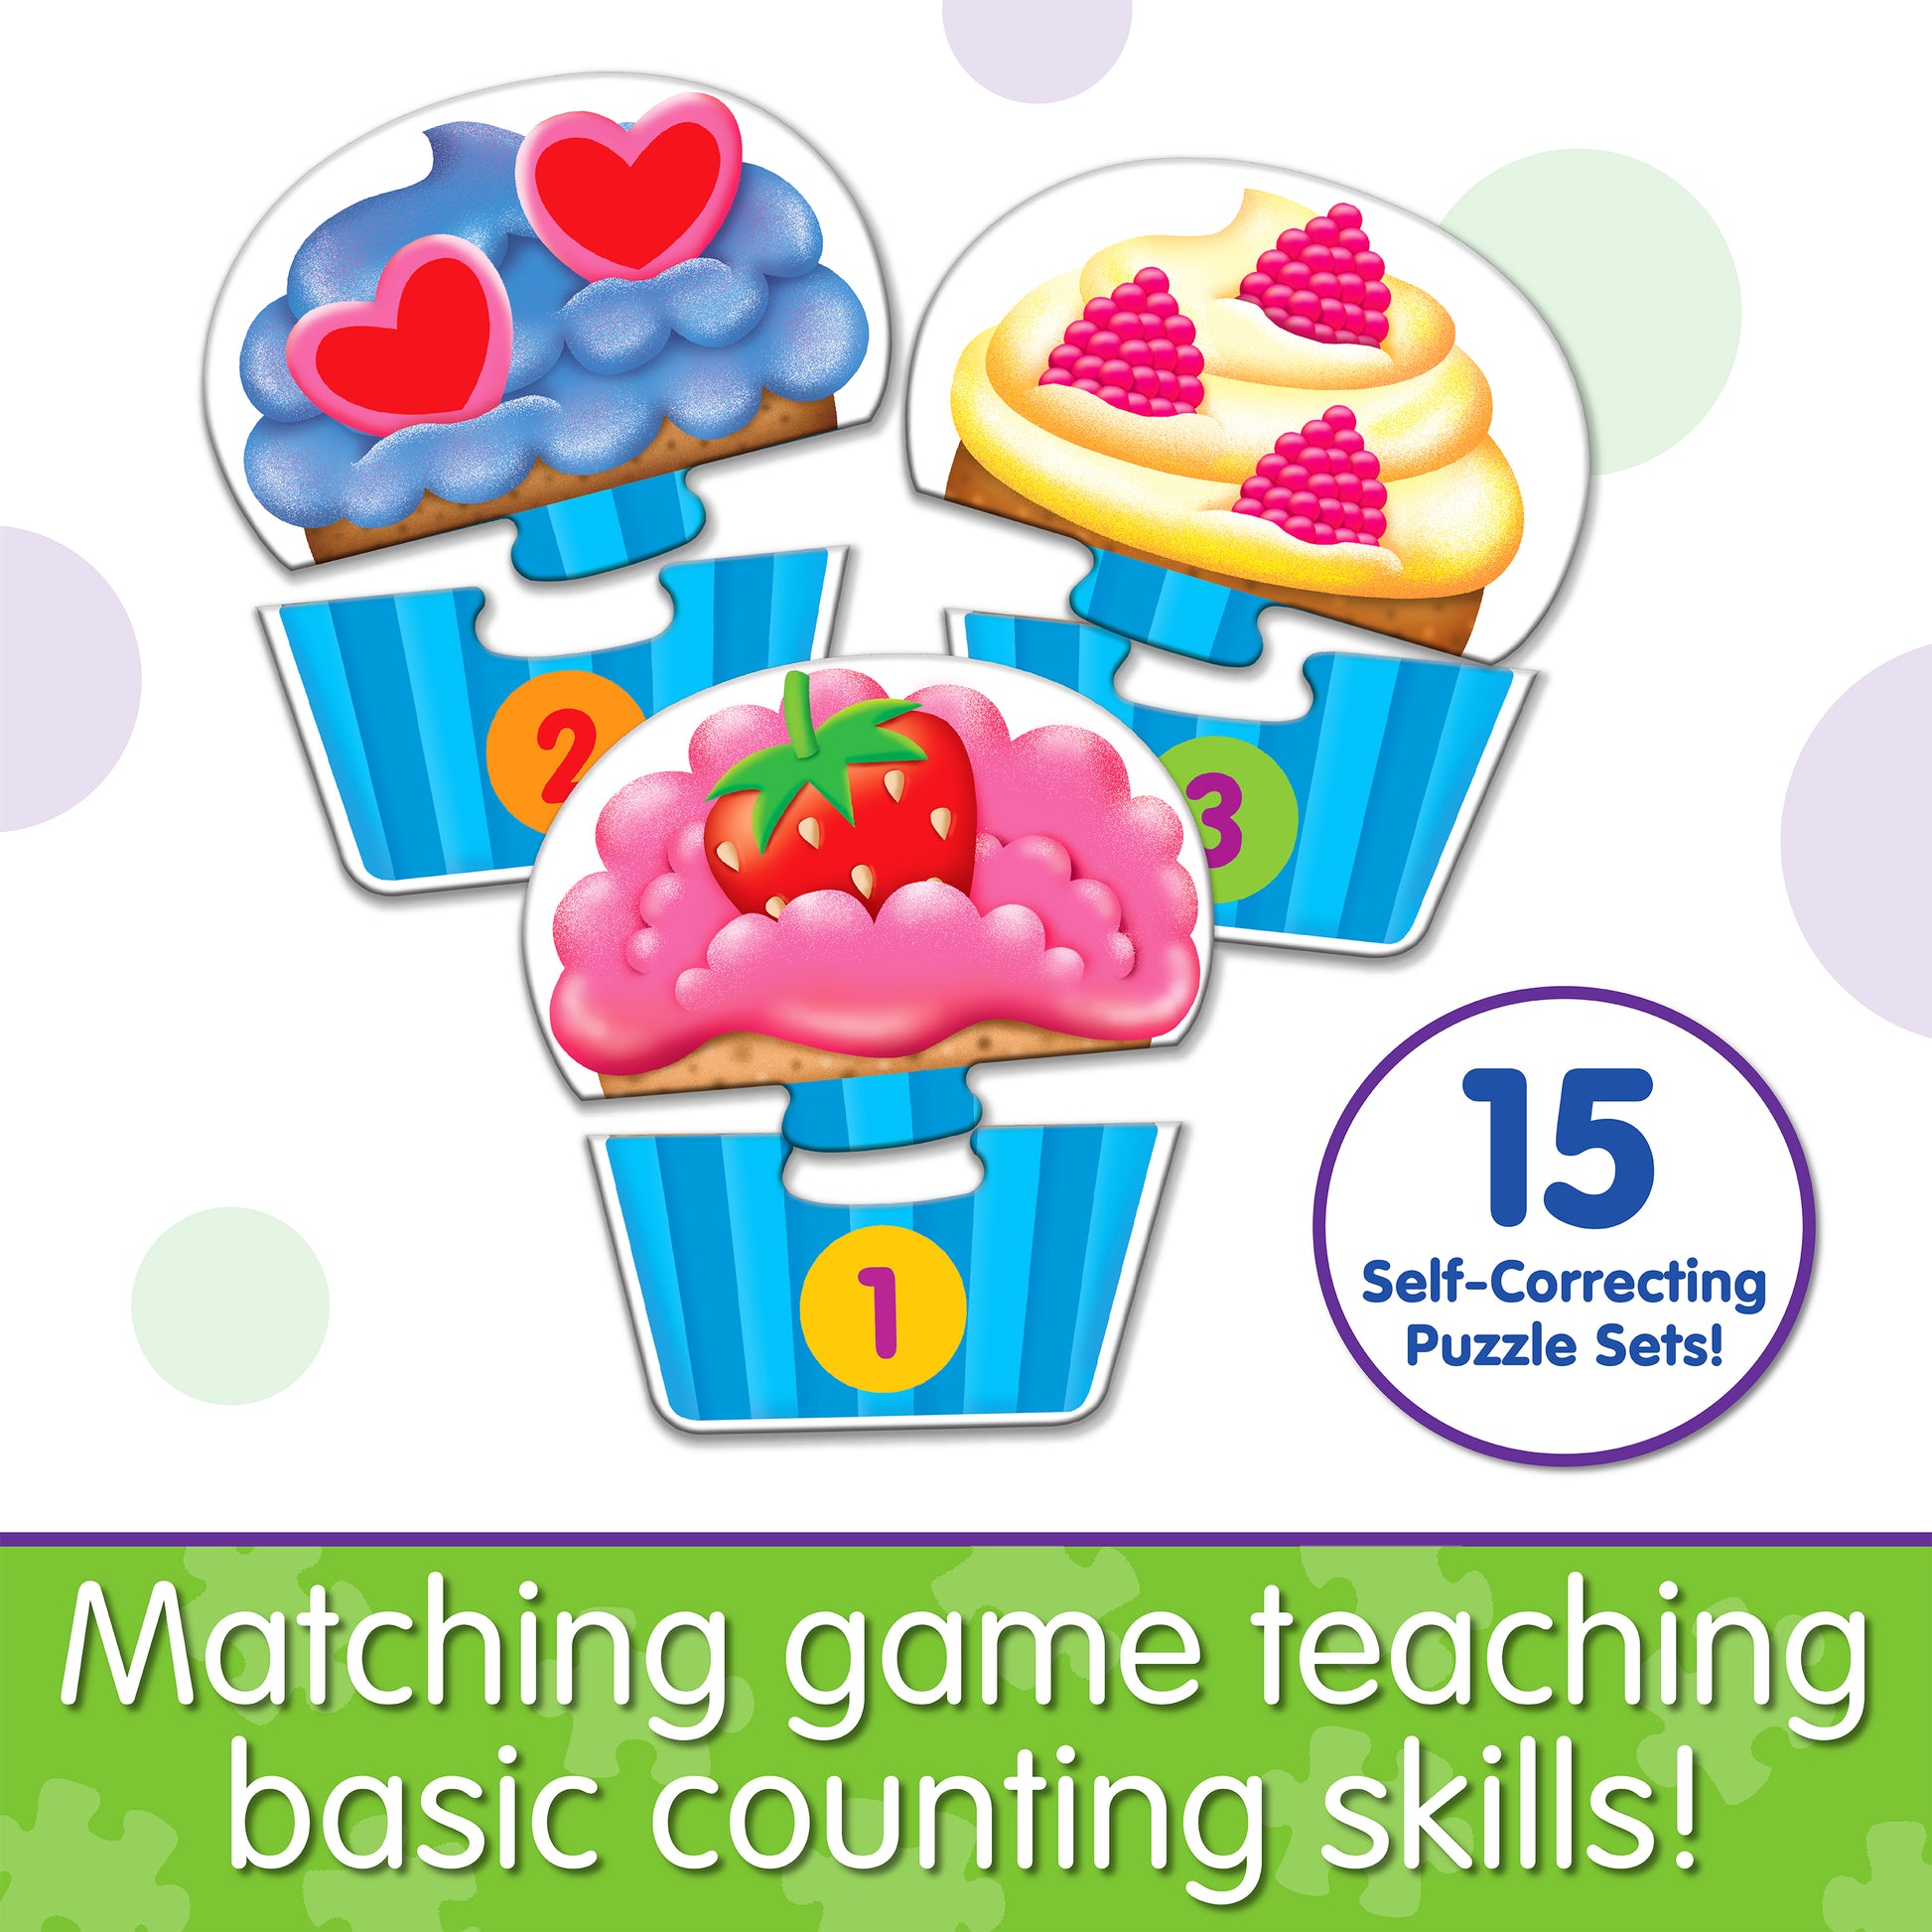 Infographic about My First Match It - Counting Cupcakes that says, "Matching game teaching basic counting skills!"